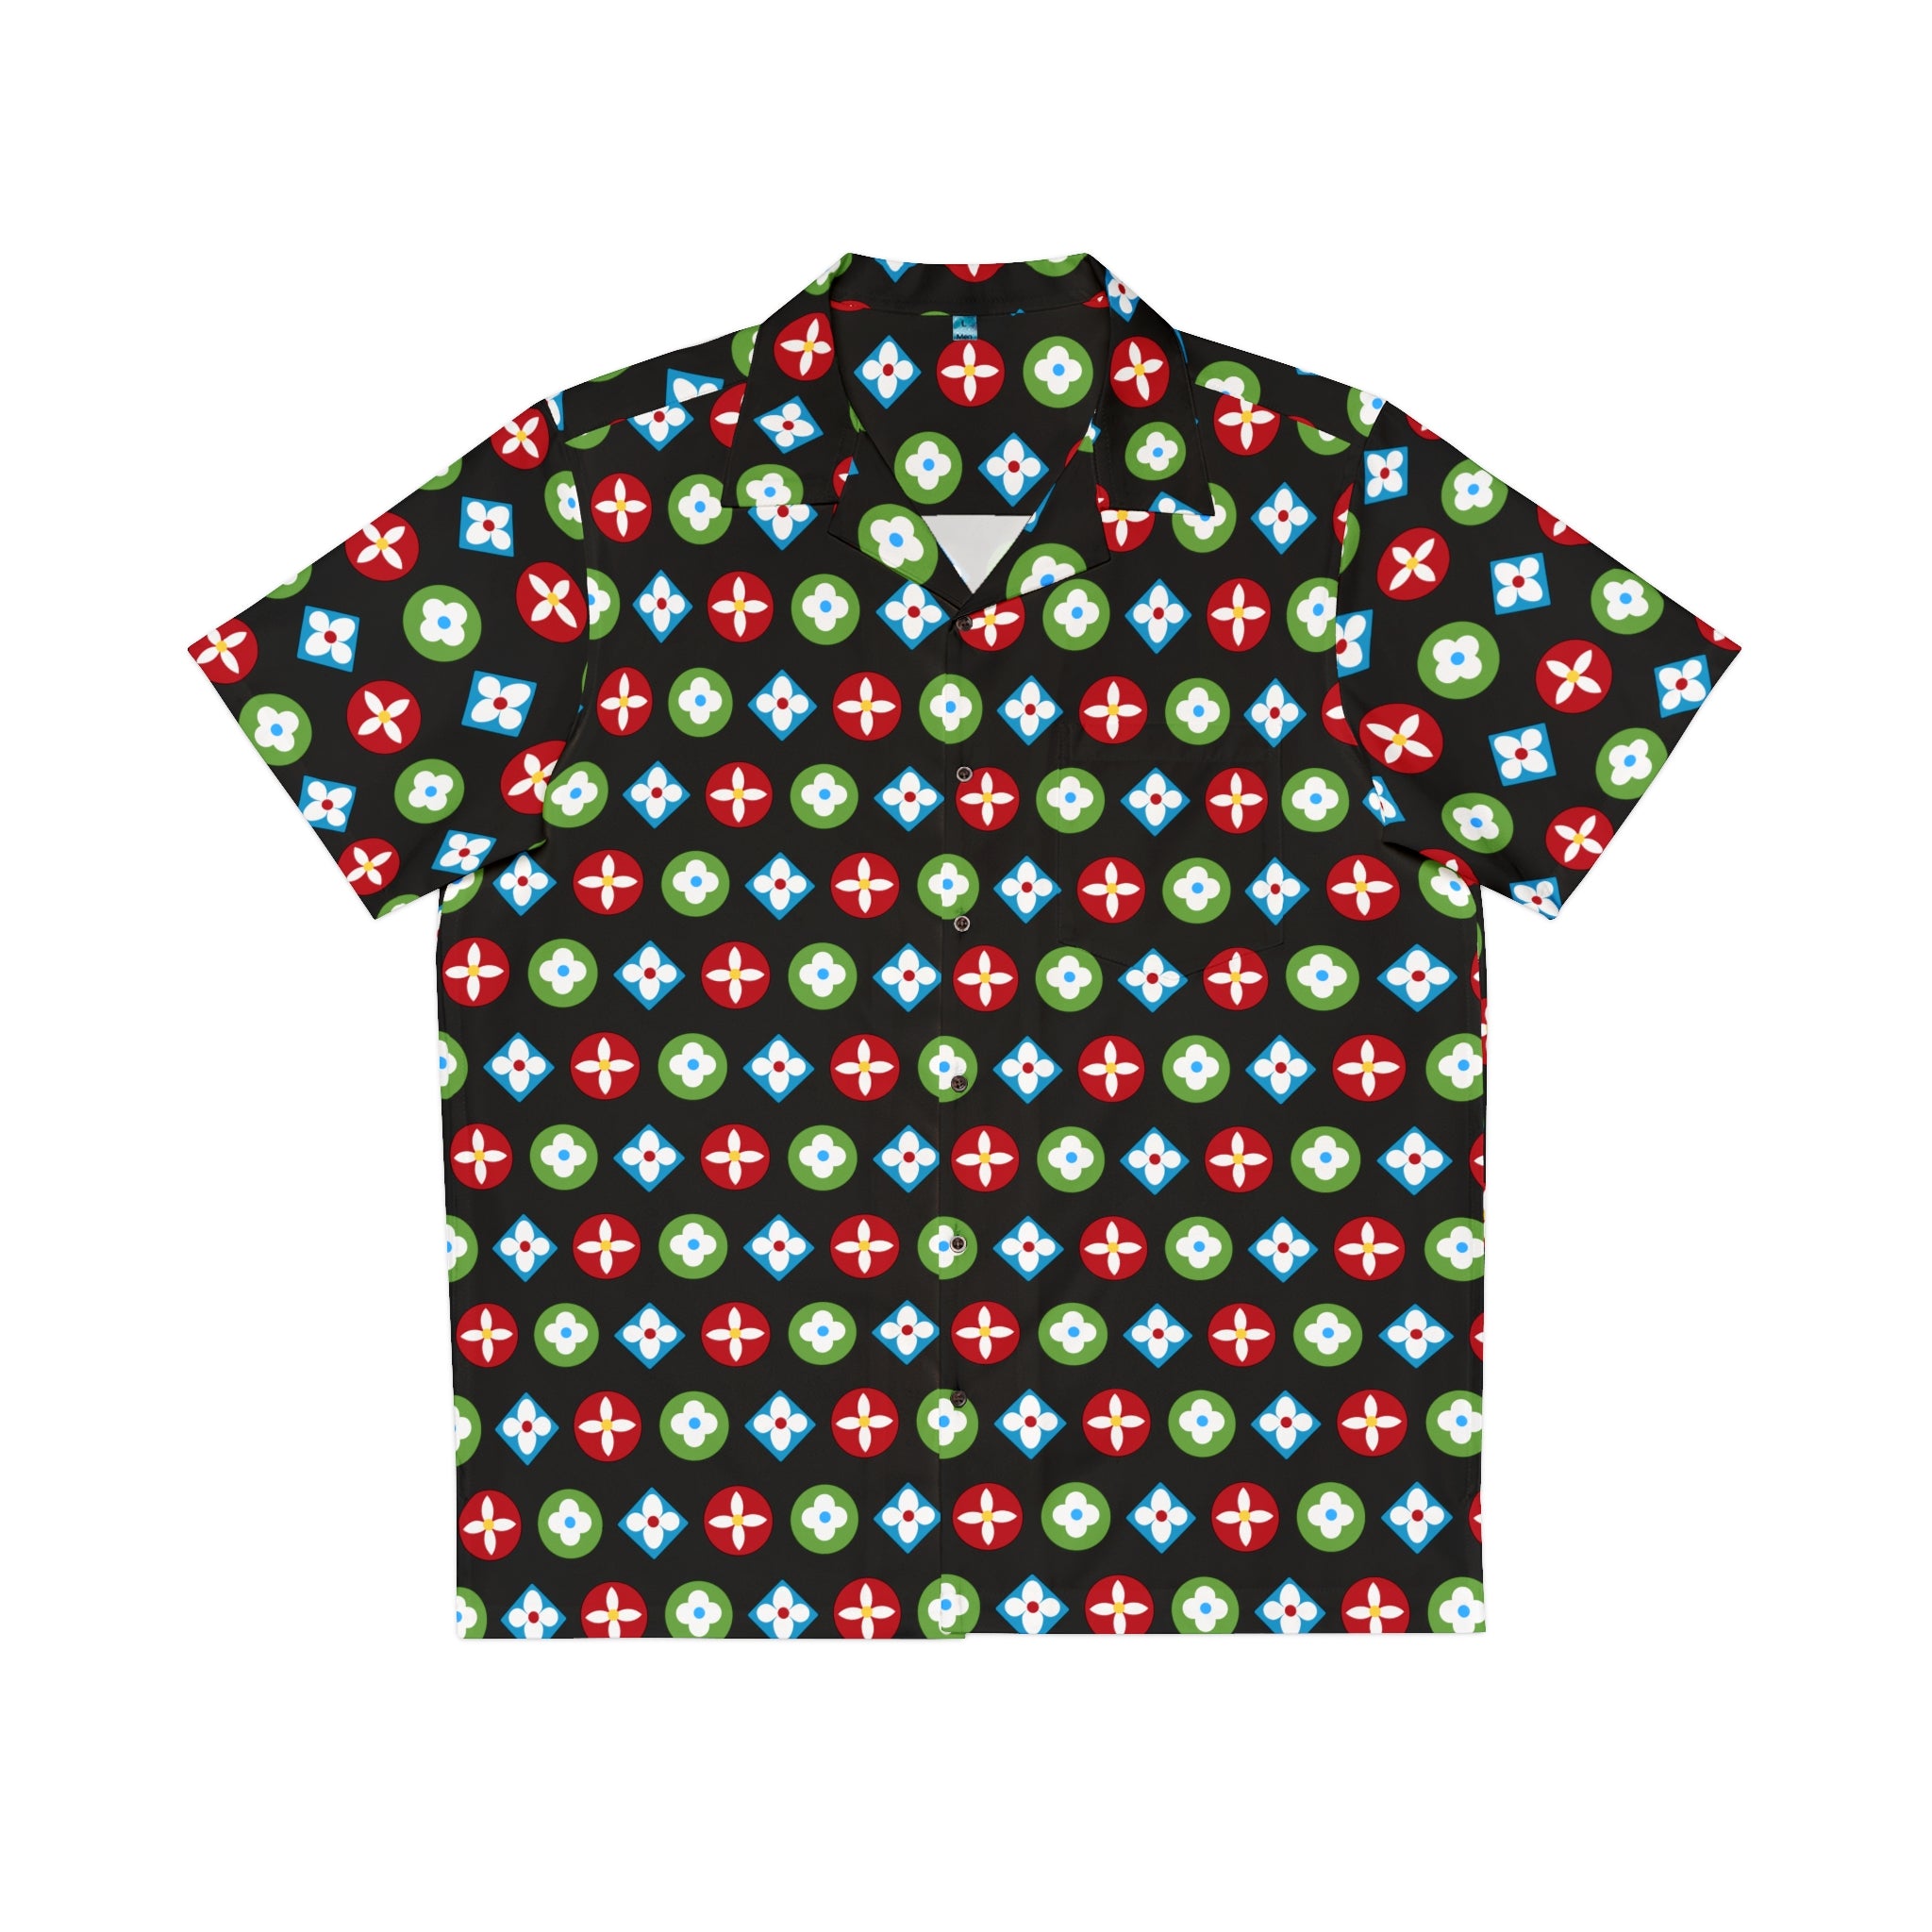  Groove Collection Trilogy of Icons Pattern (Red, Green, Blue) Black Unisex Gender Neutral Button Up Shirt, Hawaiian Shirt Men's Shirts5XLBlack